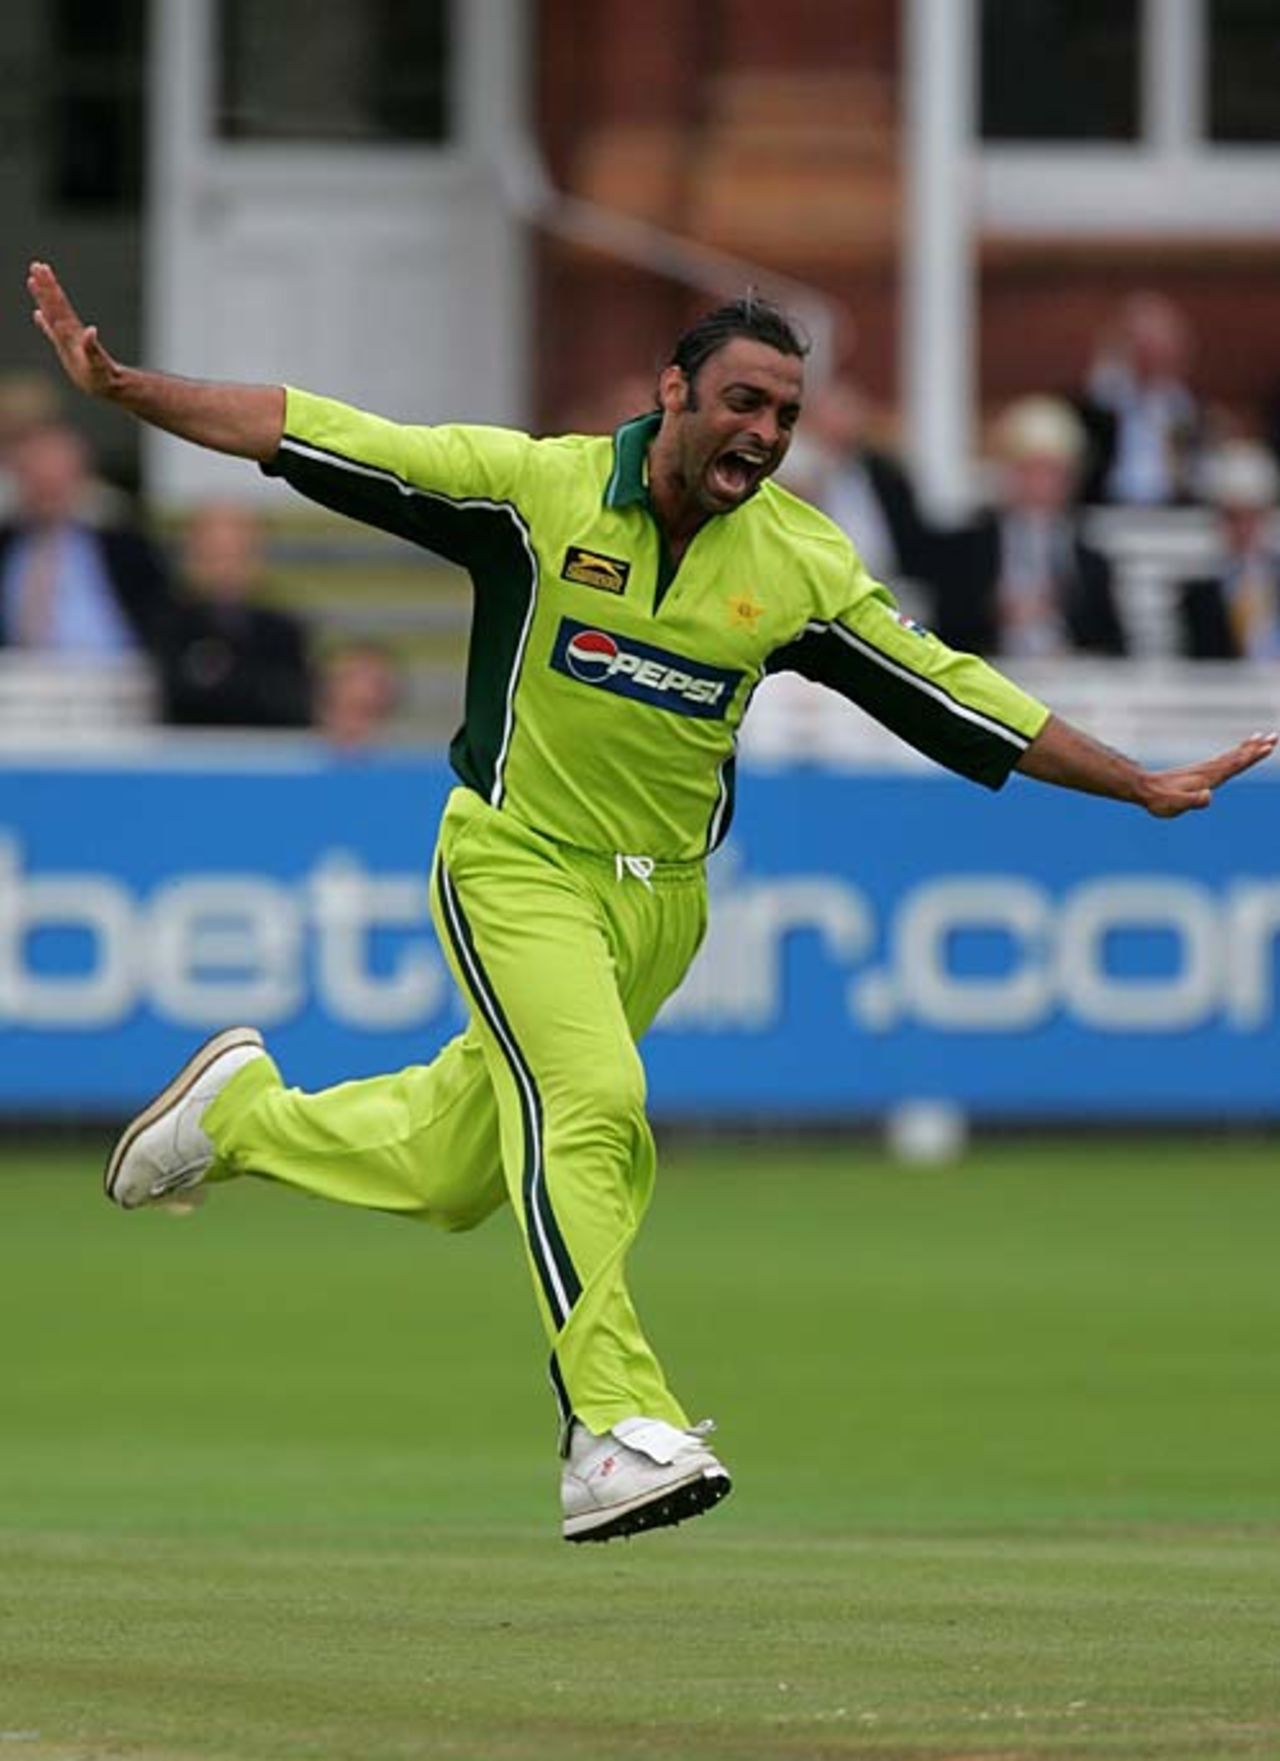 Shoaib Akhtar celebrates another wicket in his own inimitable style, England v Pakistan, 2nd ODI, Lord's, September 2, 2006